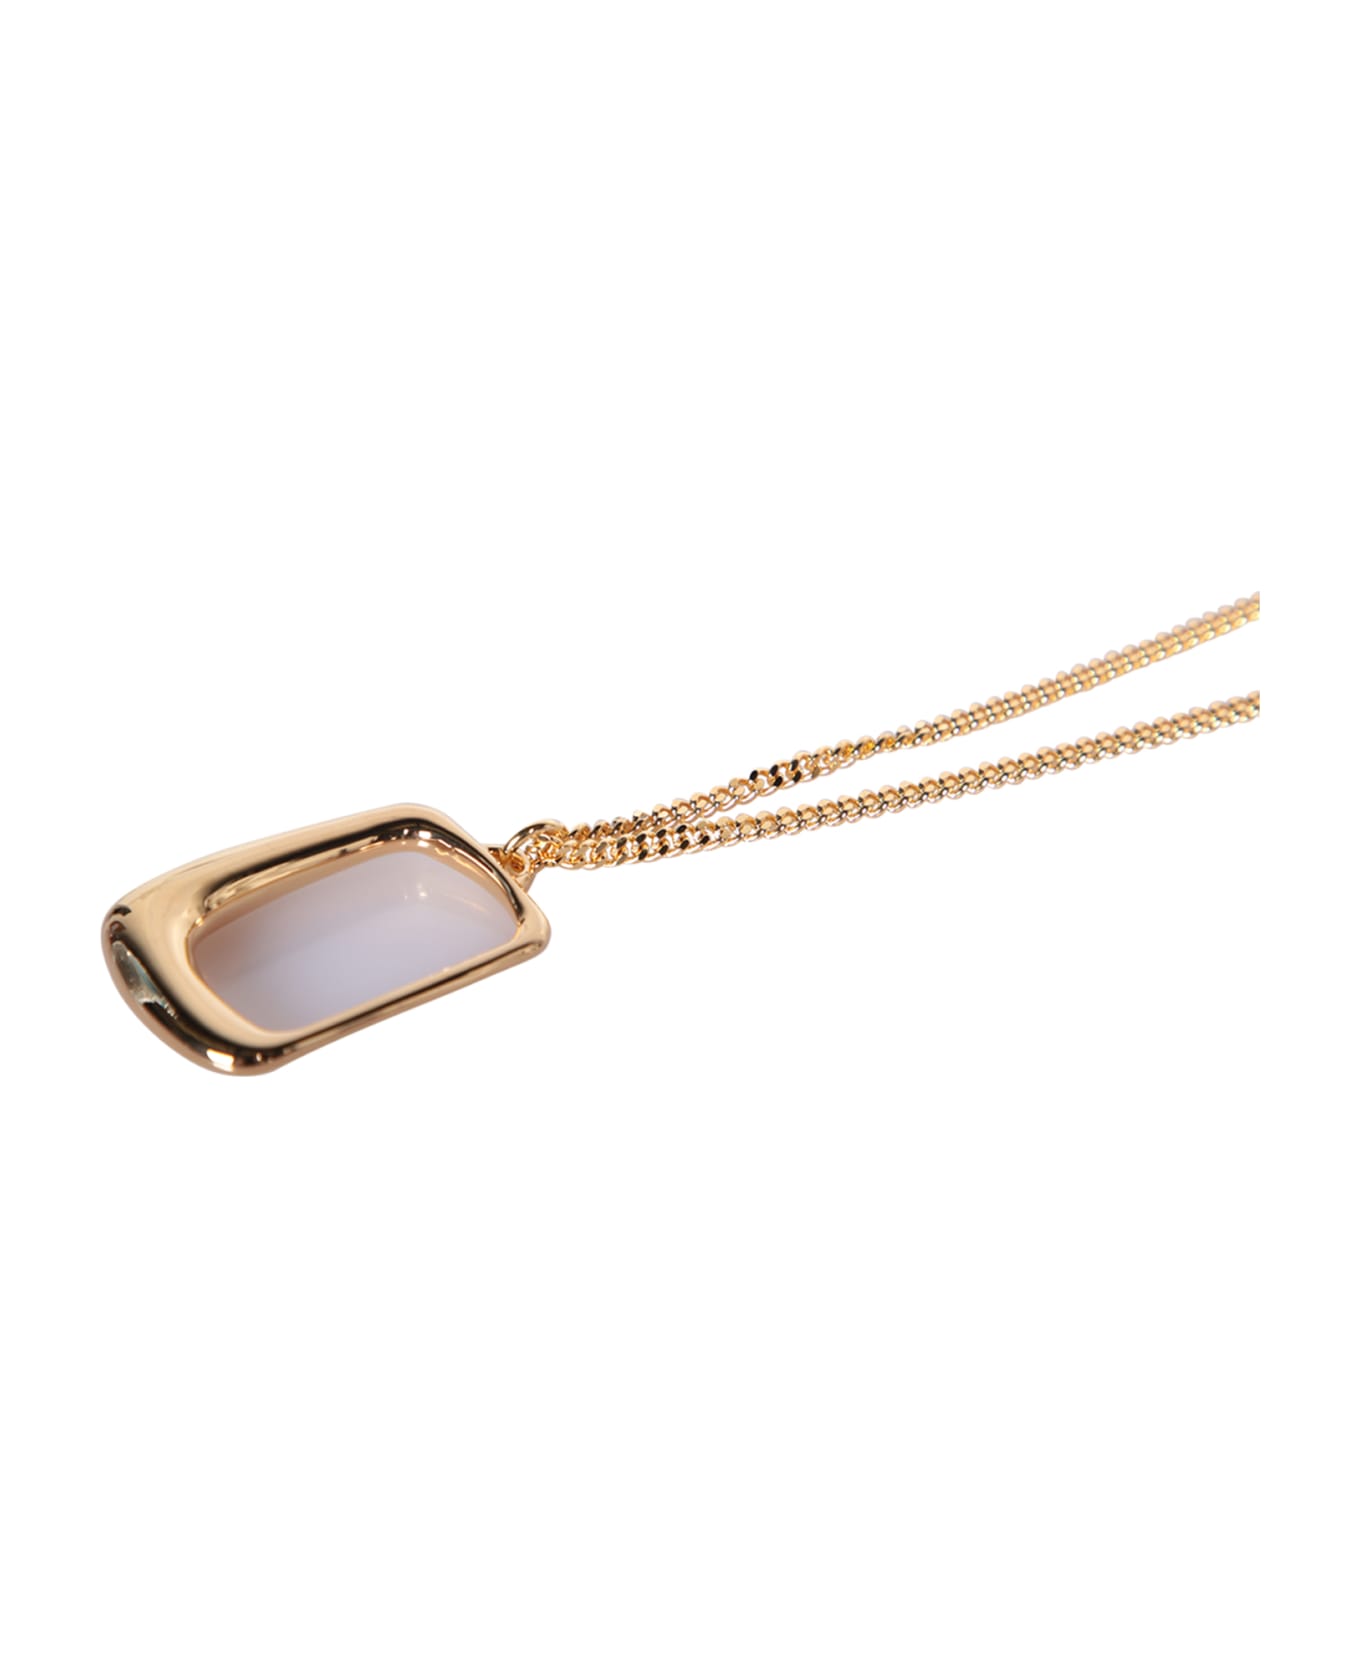 Jacquemus Le Collier Ovalo Gold Necklace - Metallic ジュエリー